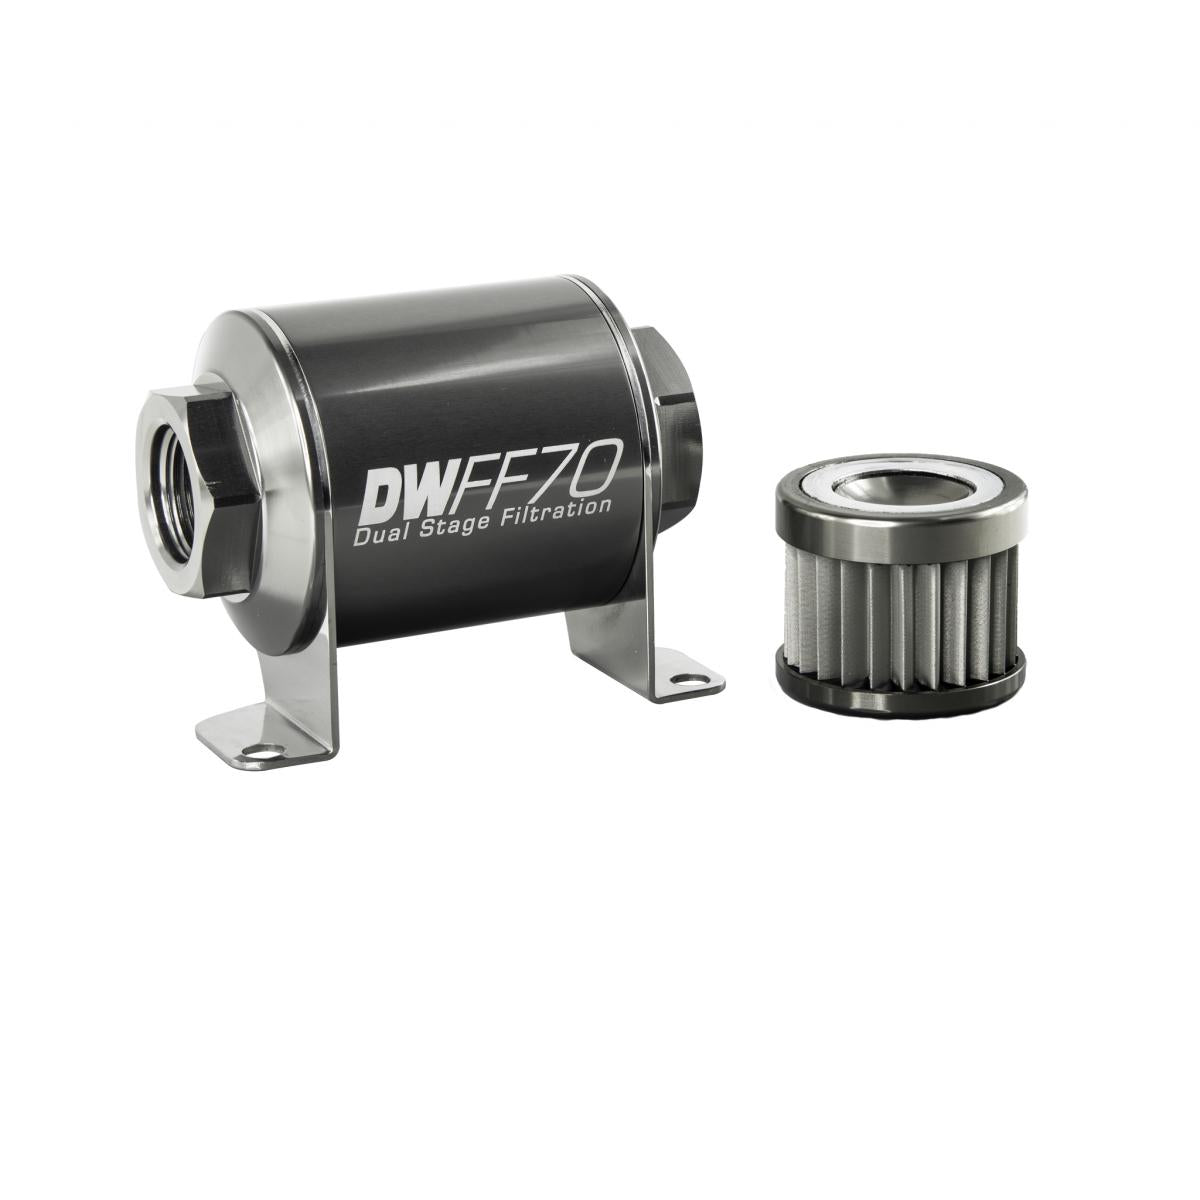 DEATSCHWERKS 8-03-070-010K In-line fuel filter element and housing kit, stainless steel 10 micron,-8 Photo-1 